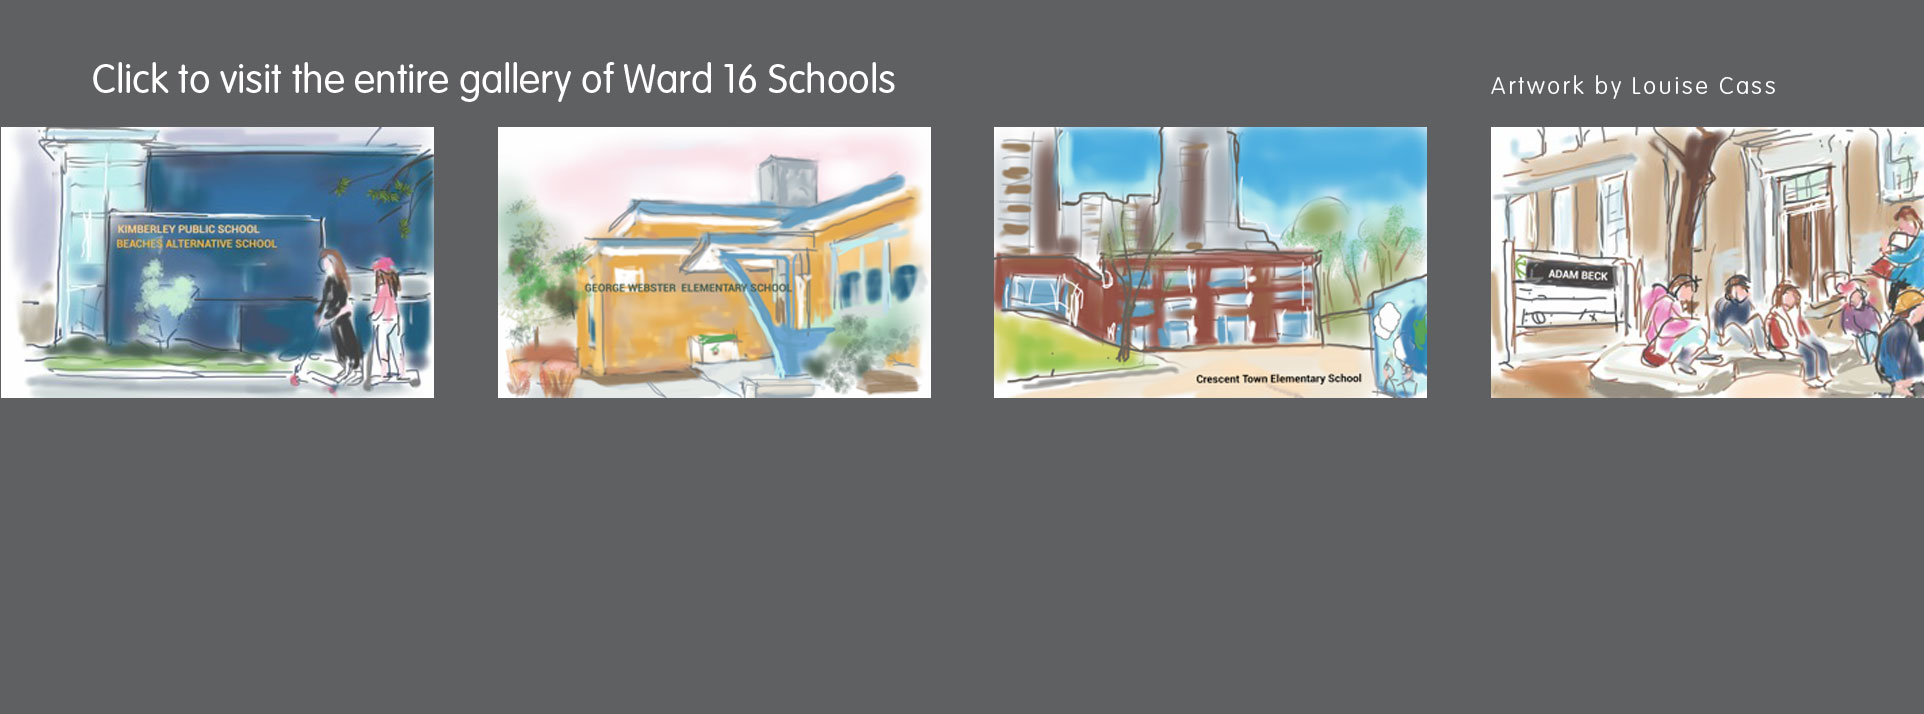 Sketches by Louise Cass of Ward 16 Schools